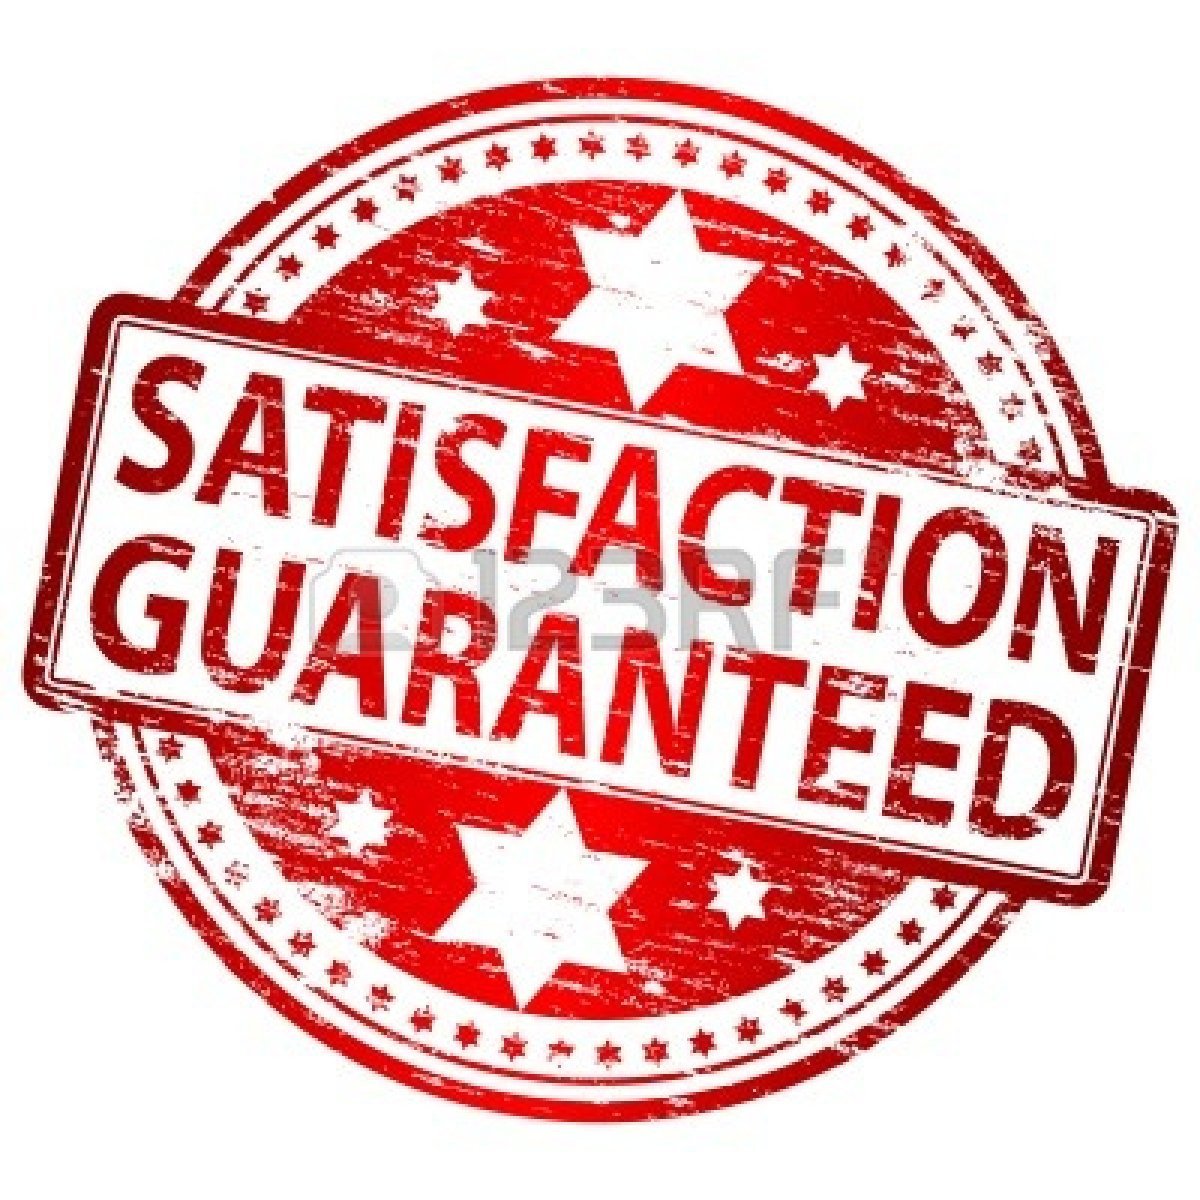 8986328 satisfaction guaranteed rubber stamp d2fba23c 29c5 4763 8d7d 476ef3bf0ff7